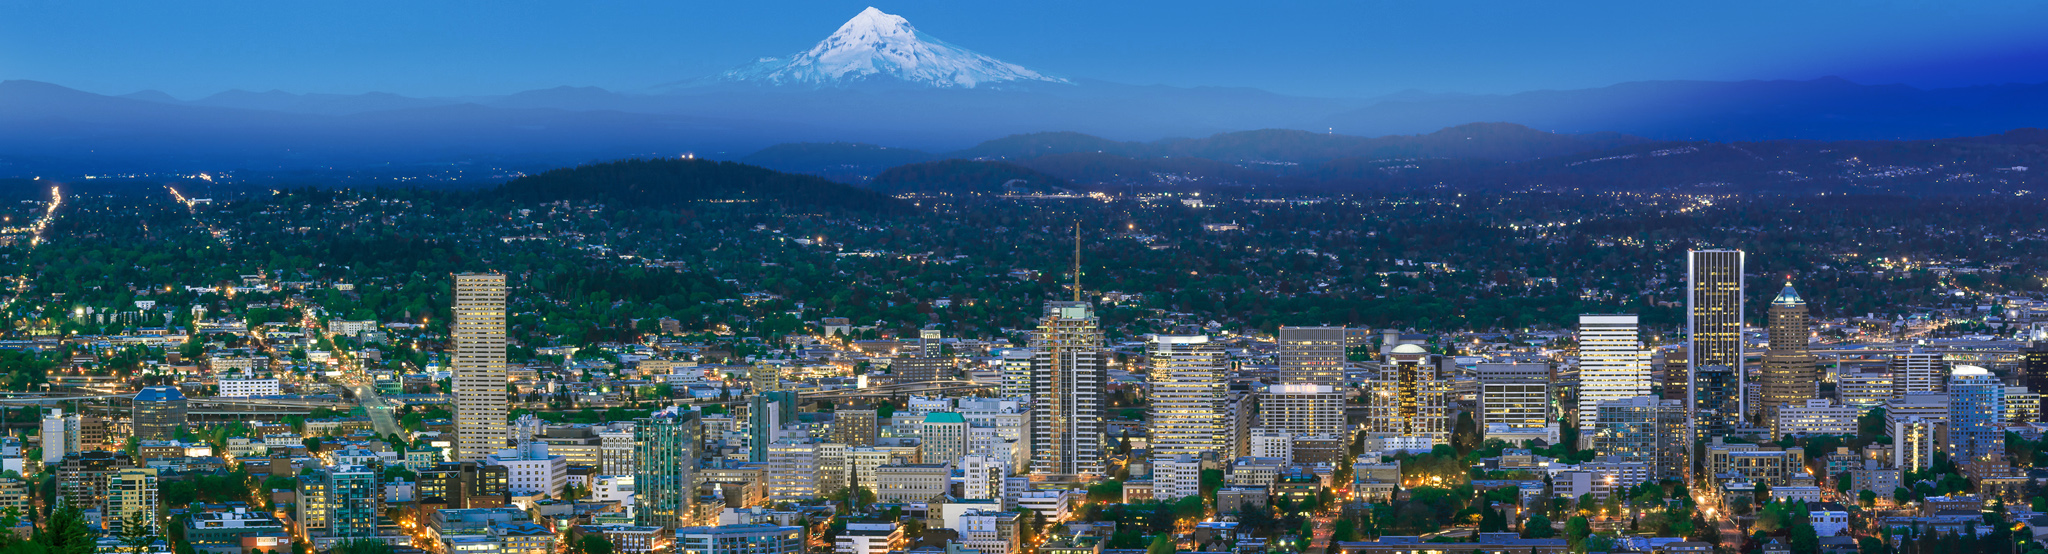 Scenic view of downtown Portland with Mt Hood in the background